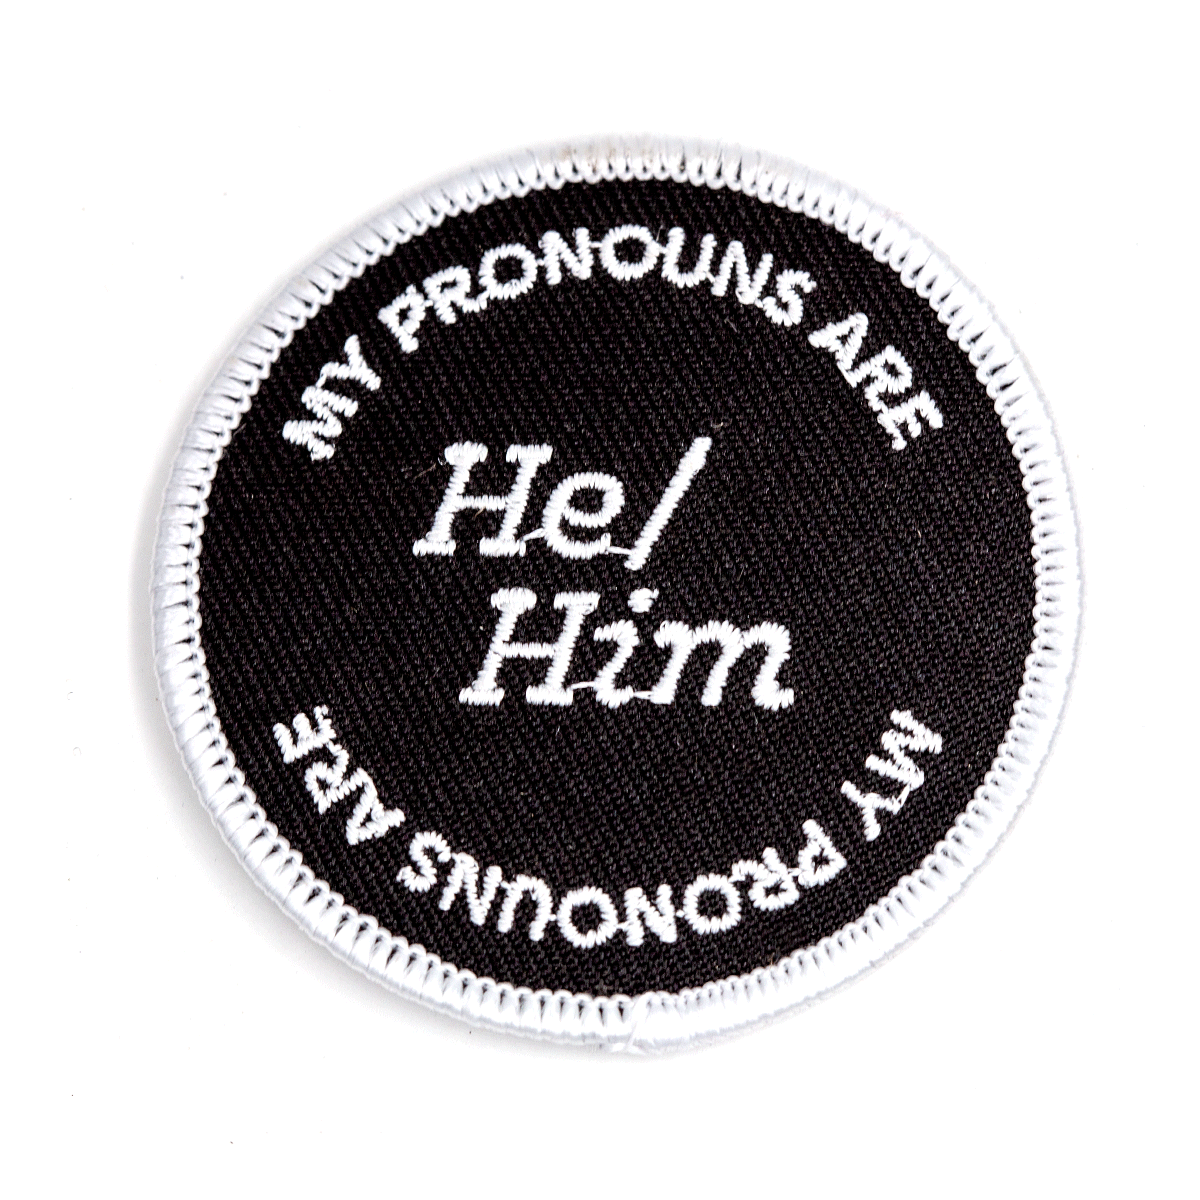 He Him Pronouns Embroidered Iron-On Patch